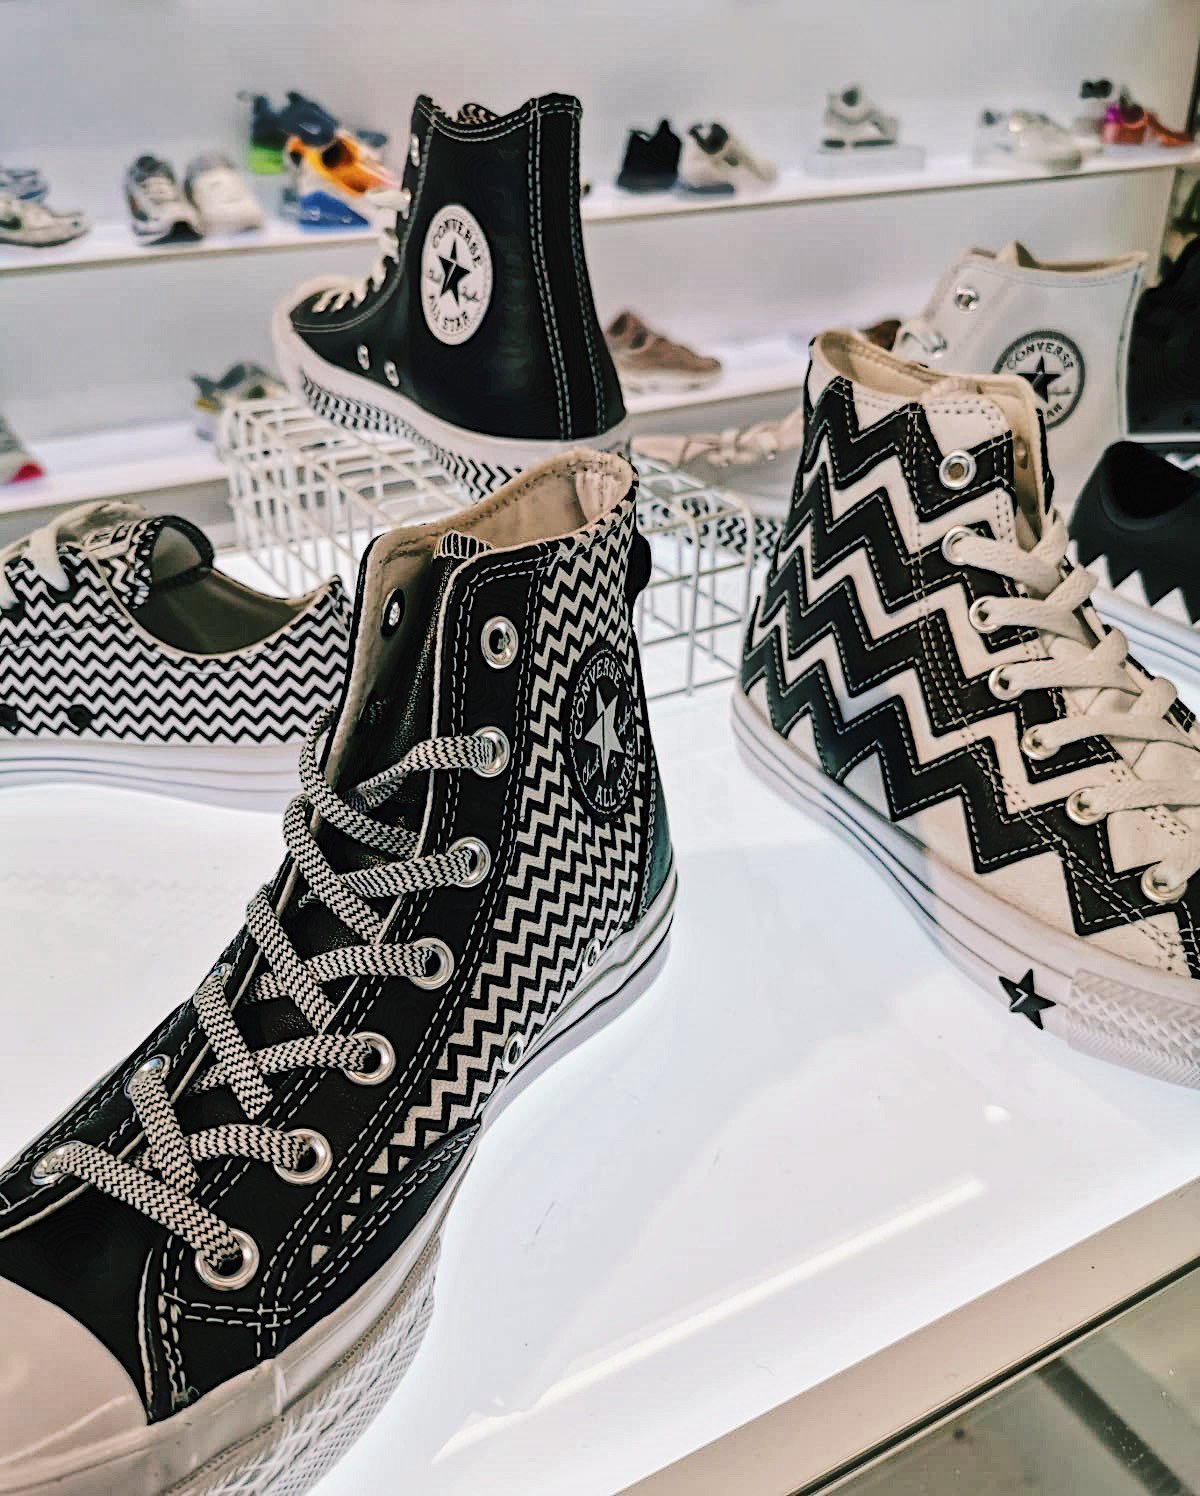 Oxford Street W1 on X: "Update your classic @Converse with some trainers from the VLTG collection. Converse have created collection inspired by '90s basketball patterns and we LOVE the high-contrast designs.